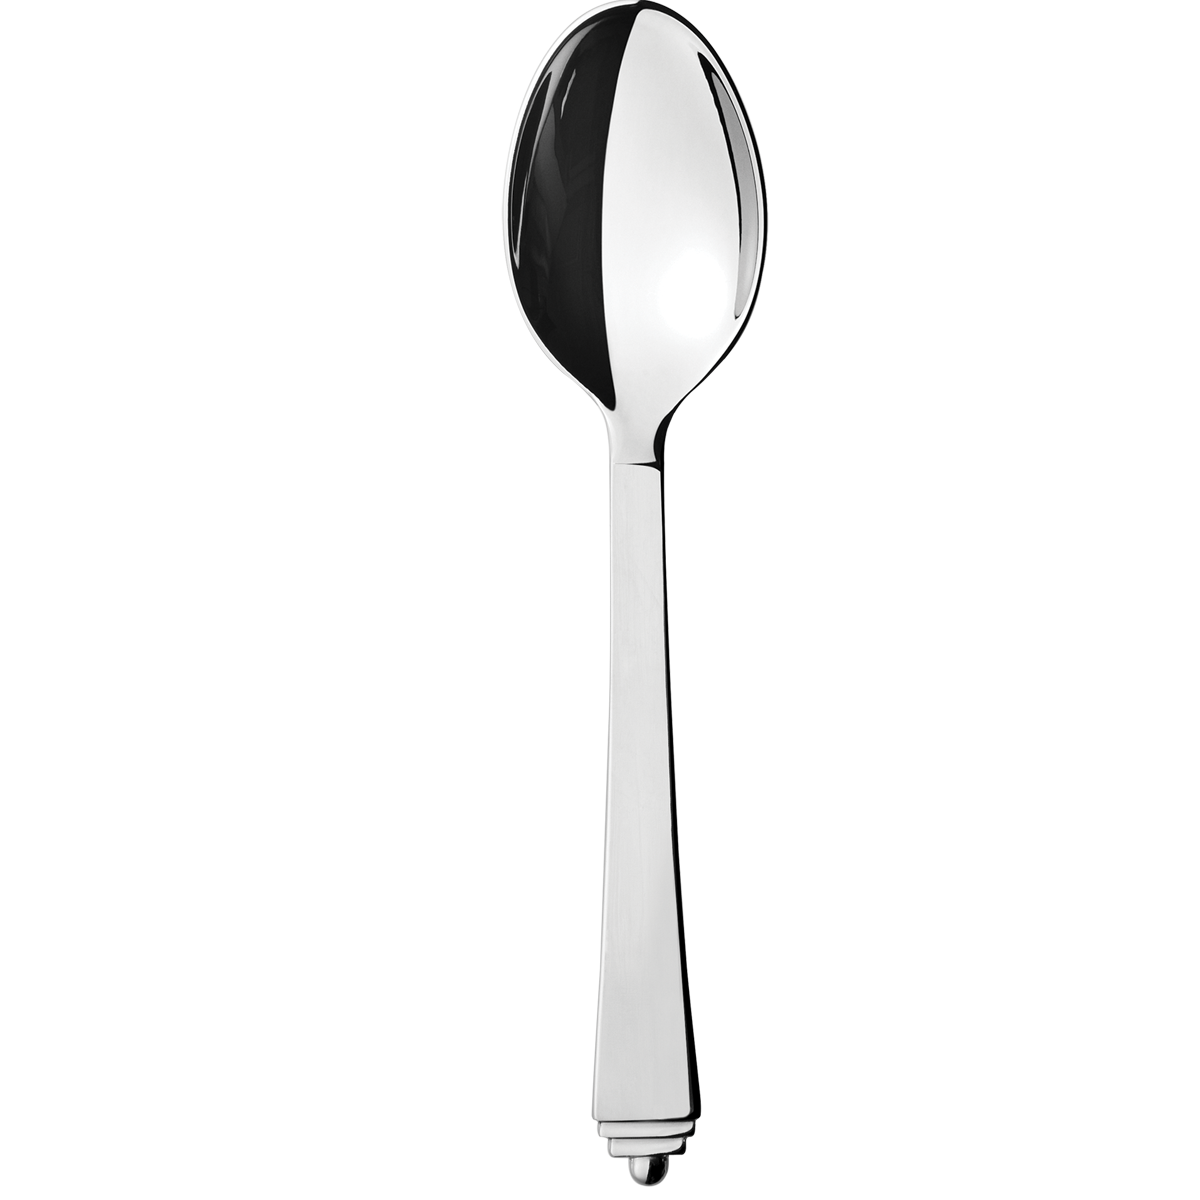 spoon png image collection for download crazypngm crazy png images download #29428